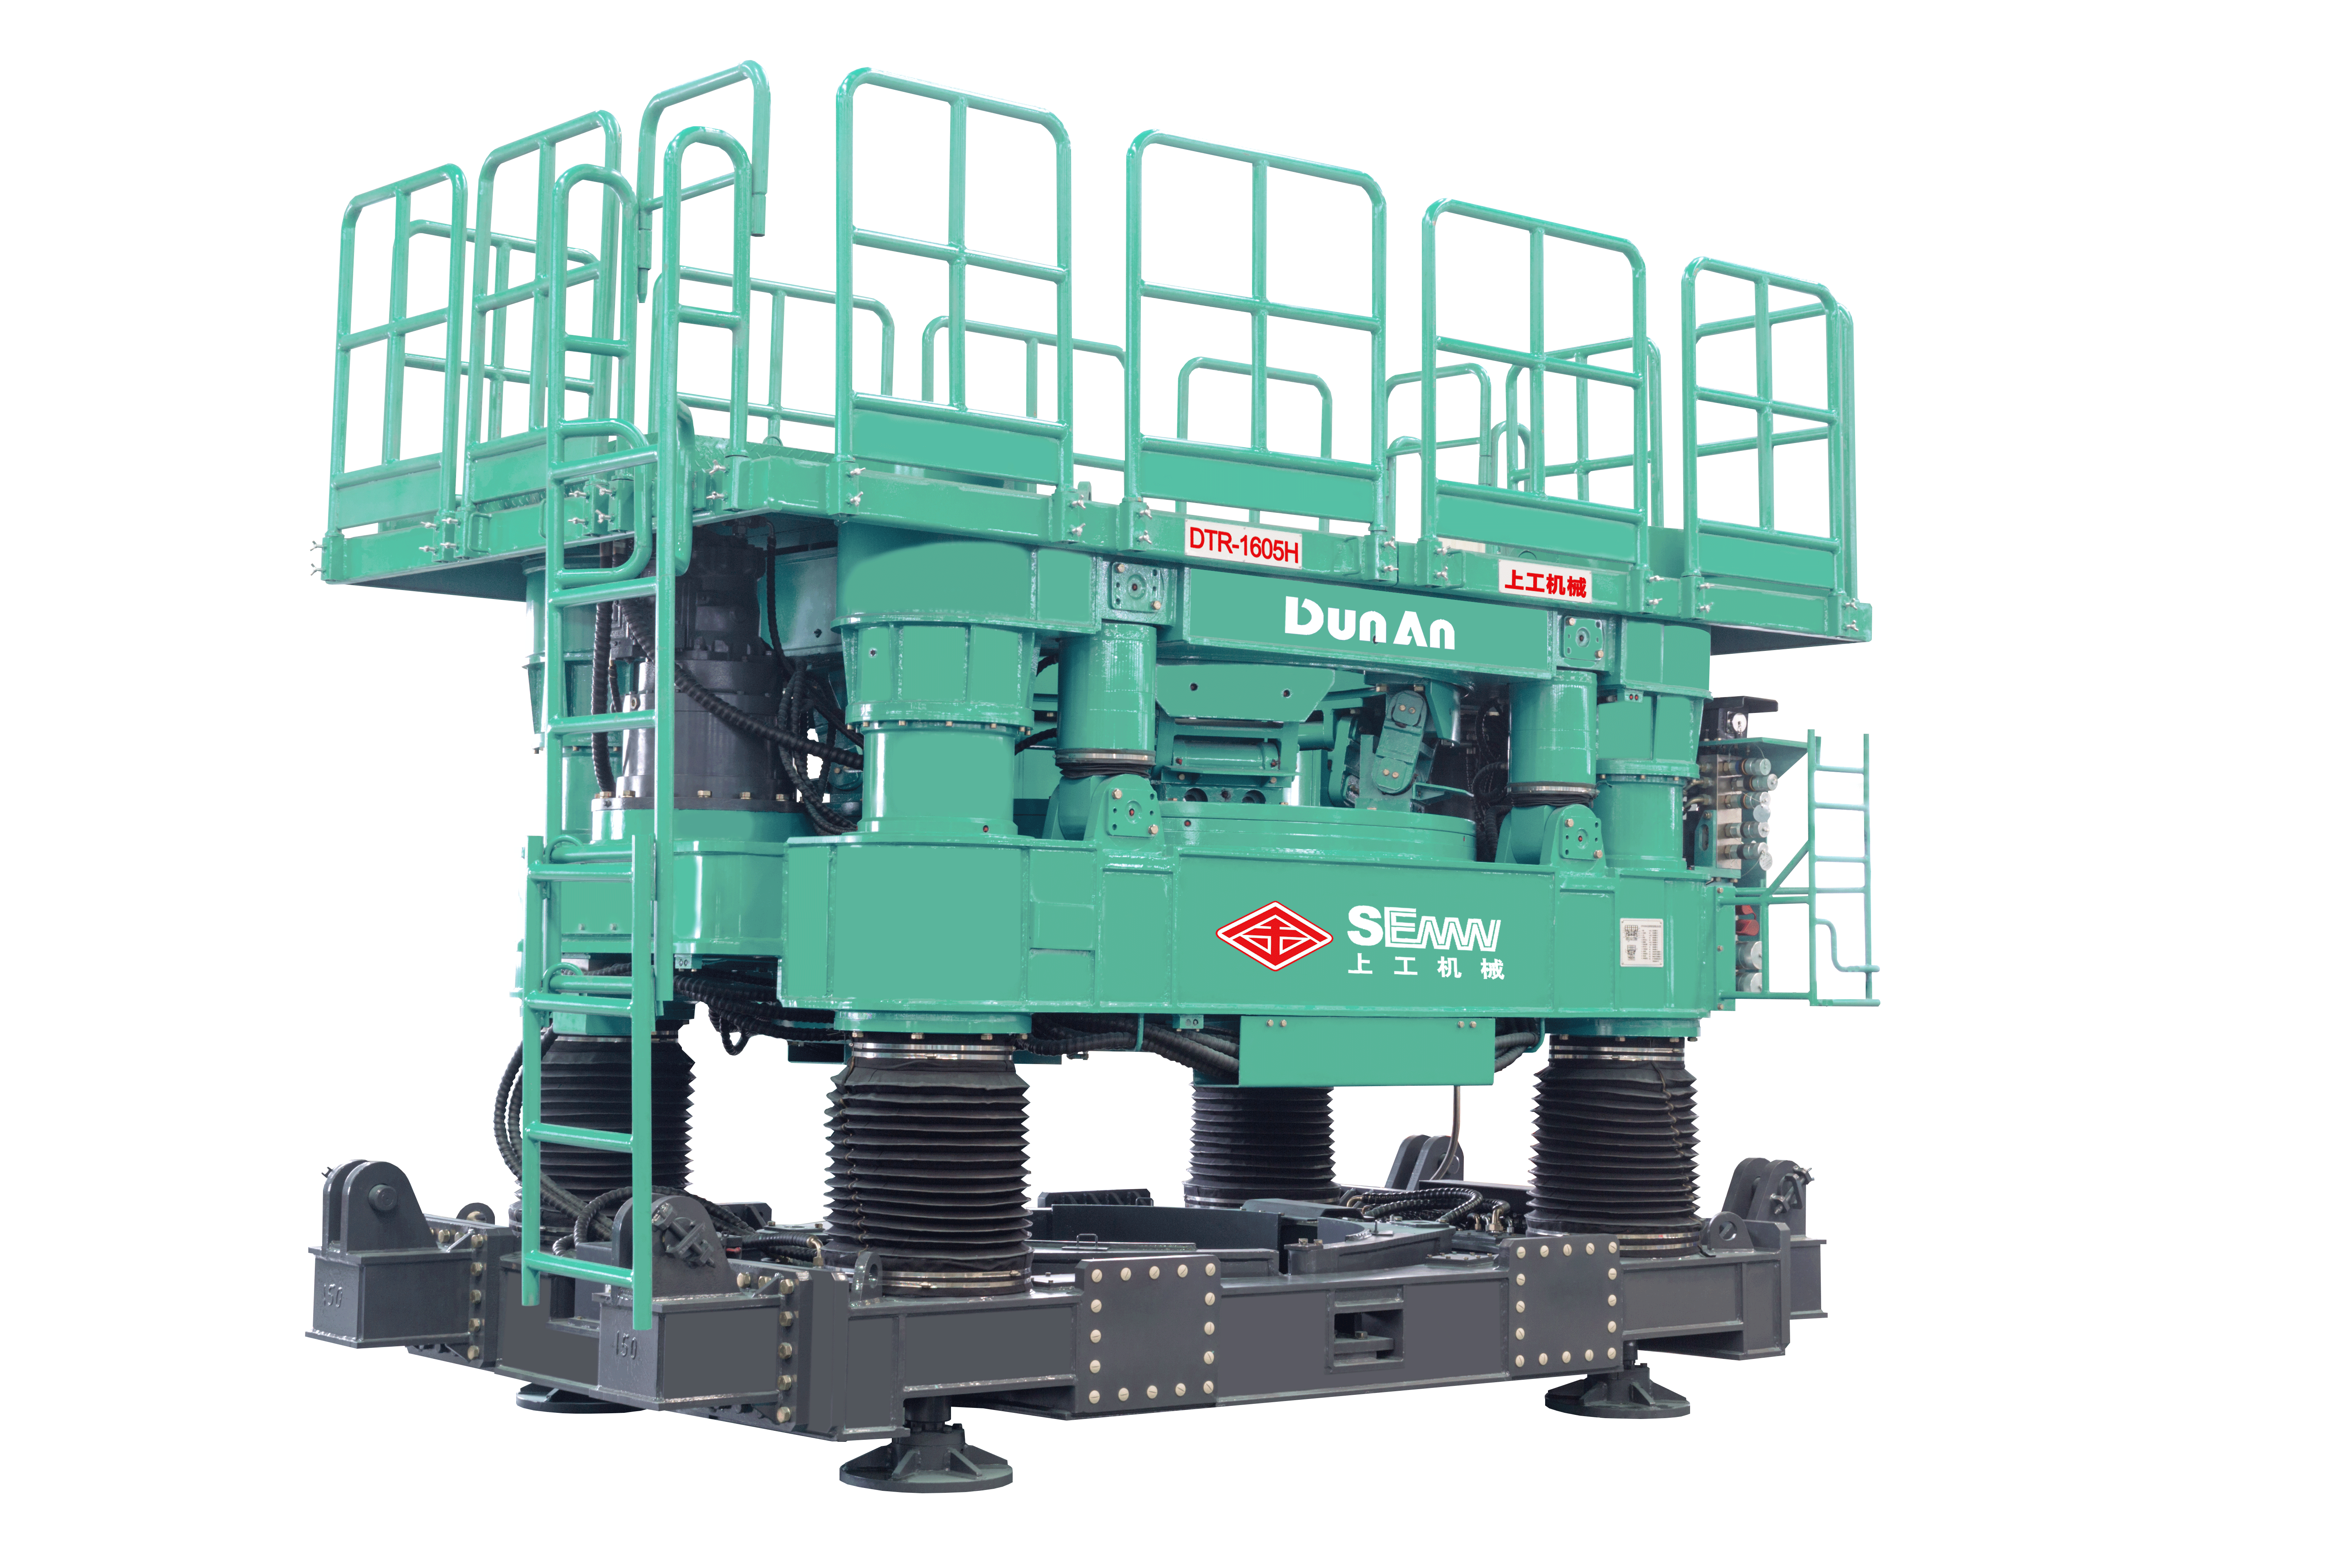 Factory Cheap Hot Sheet Piling Rig -
 DTR 1605H Casing Rotator Device – Engineering Machinery